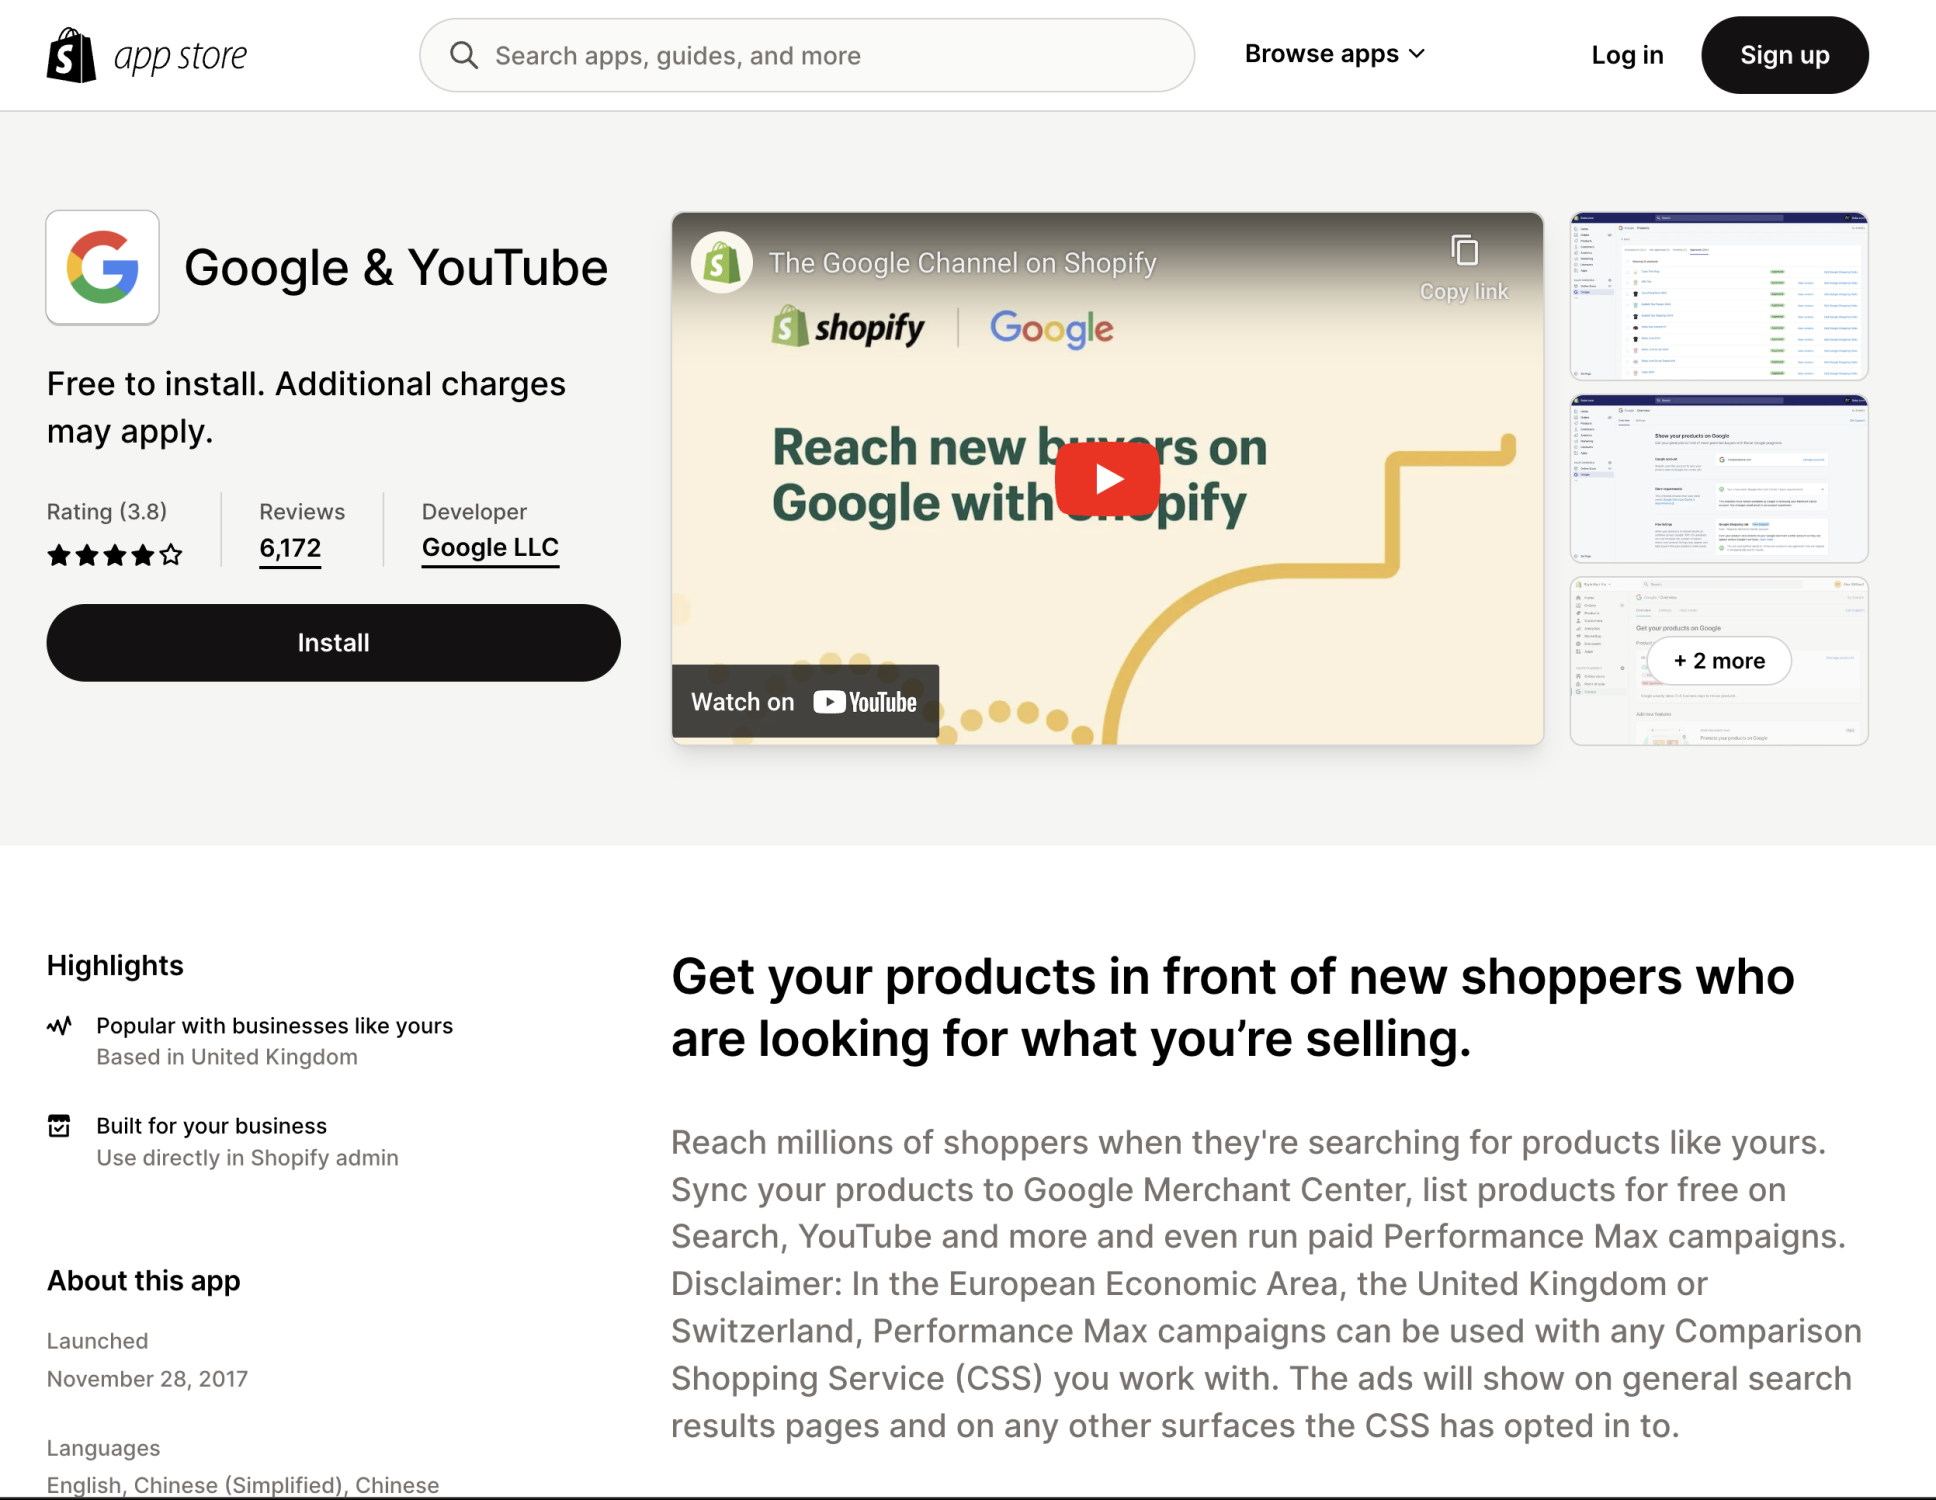 Screen shot of the Shopify Google &amp;amp;amp;amp;amp;amp;amp;amp;amp;amp;amp;amp;amp;amp;amp;amp;amp;amp;amp;amp;amp;amp;amp;amp;amp;amp;amp;amp;amp;amp;amp;amp;amp;amp;amp;amp;amp;amp;amp;amp;amp;amp;amp;amp;amp;amp;amp;amp;amp;amp;amp;amp;amp;amp;amp;amp;amp;amp;amp;amp;amp;amp;amp;amp;amp;amp;amp;amp;amp;amp;amp;amp;amp;amp;amp;amp;amp;amp;amp;amp;amp;amp;amp;amp;amp;amp;amp;amp;amp;amp;amp;amp;amp;amp;amp;amp;amp;amp;amp;amp;amp;amp;amp;amp;amp;amp;amp;amp;amp;amp;amp;amp;amp;amp;amp;amp;amp;amp;amp;amp;amp;amp;amp;amp;amp;amp;amp;amp;amp;amp;amp;amp;amp;amp;amp;amp;amp;amp;amp;amp;amp;amp;amp;amp;amp;amp;amp;amp;amp;amp;amp;amp;amp;amp;amp;amp;amp;amp;amp;amp;amp;amp;amp;amp;amp;amp;amp;amp;amp;amp;amp;amp;amp;amp;amp;amp;amp;amp;amp; YouTube app page